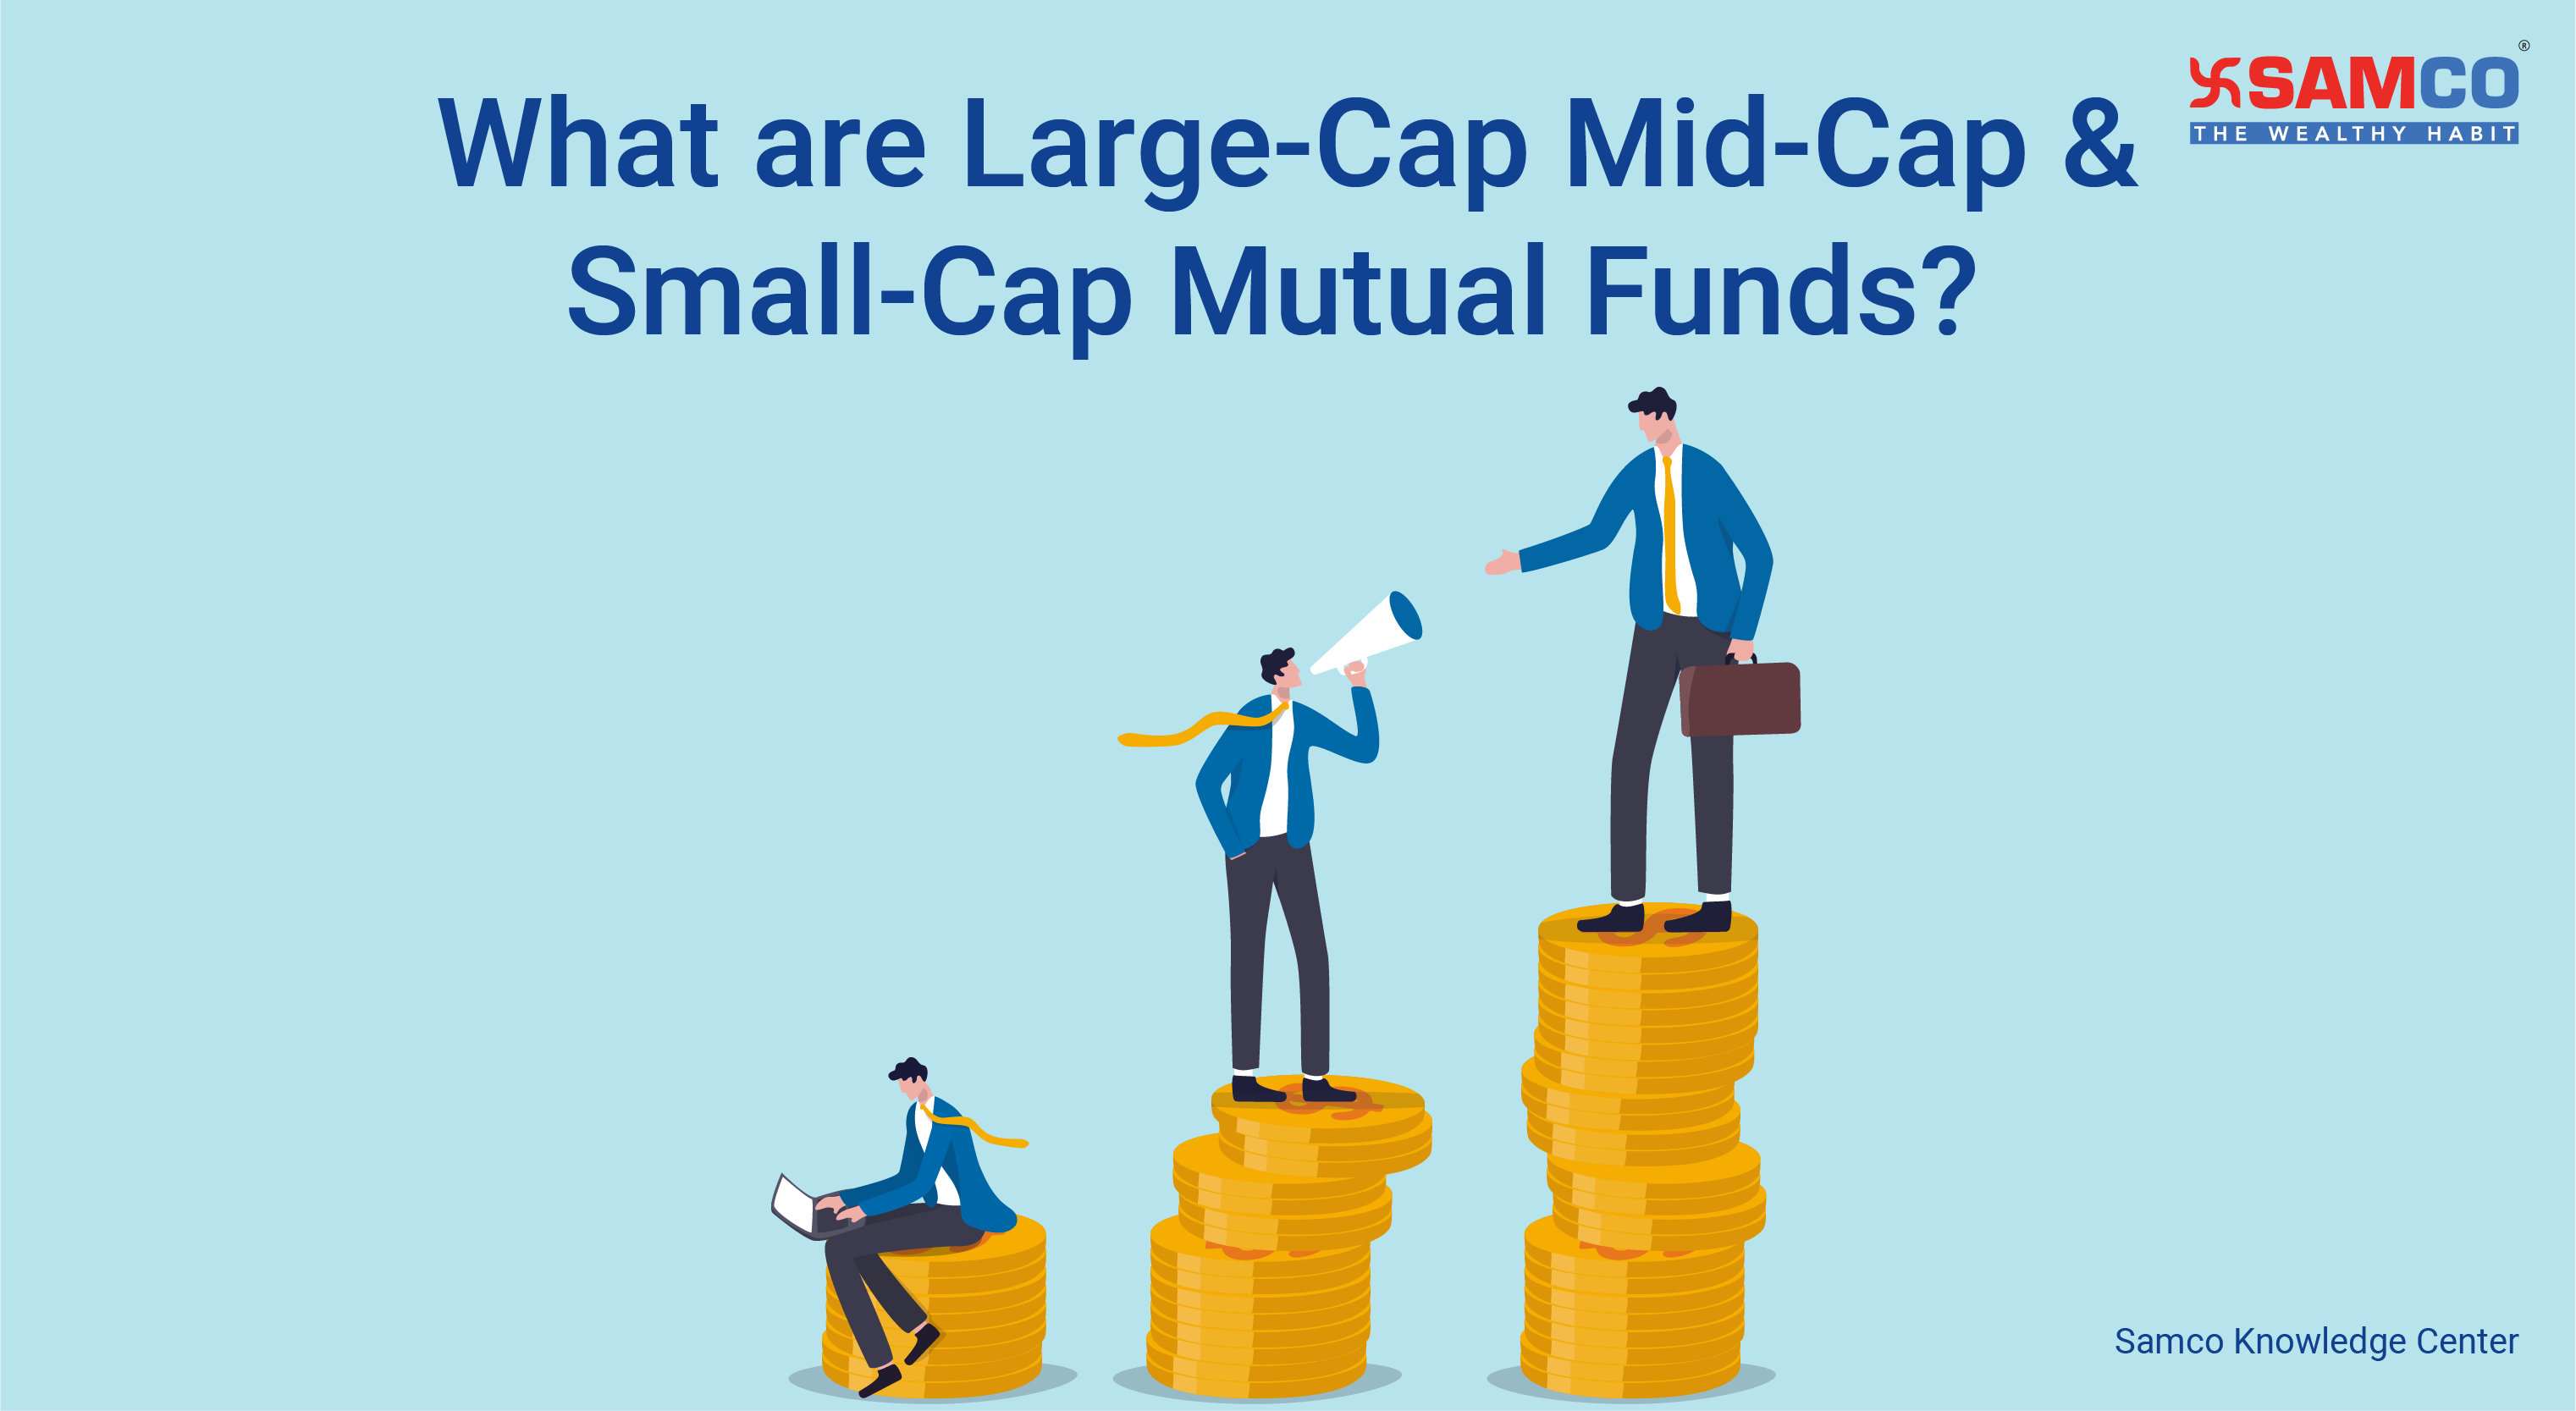 What are Large-Cap Mid-Cap & Small-Cap Mutual Funds?